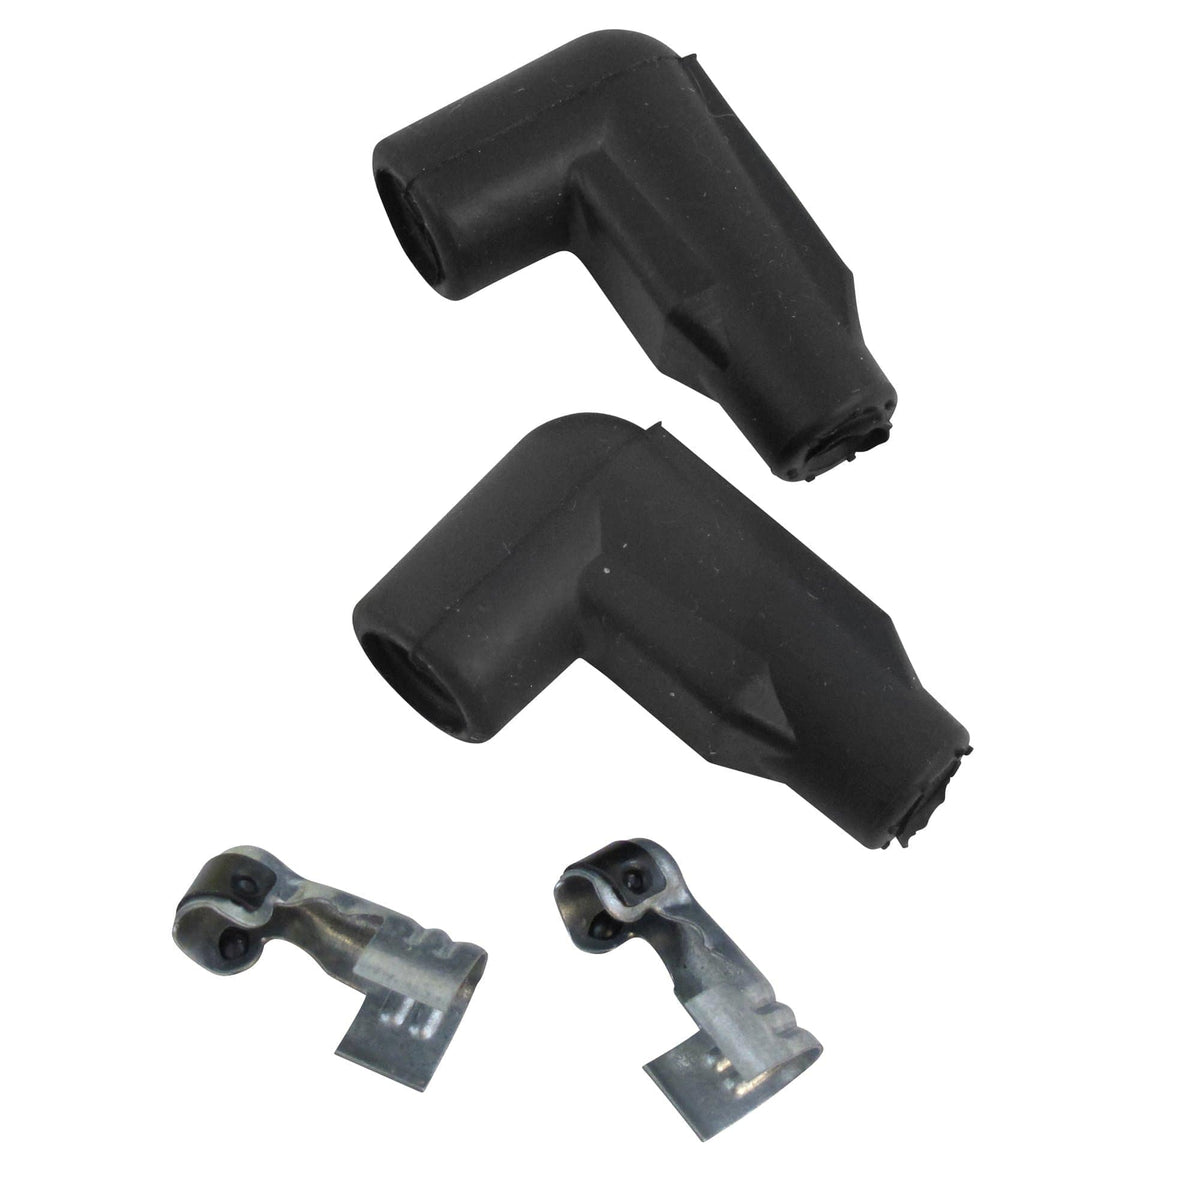 Cycle Standard Spark Plug Boots and Terminals - 90 Degree Boots